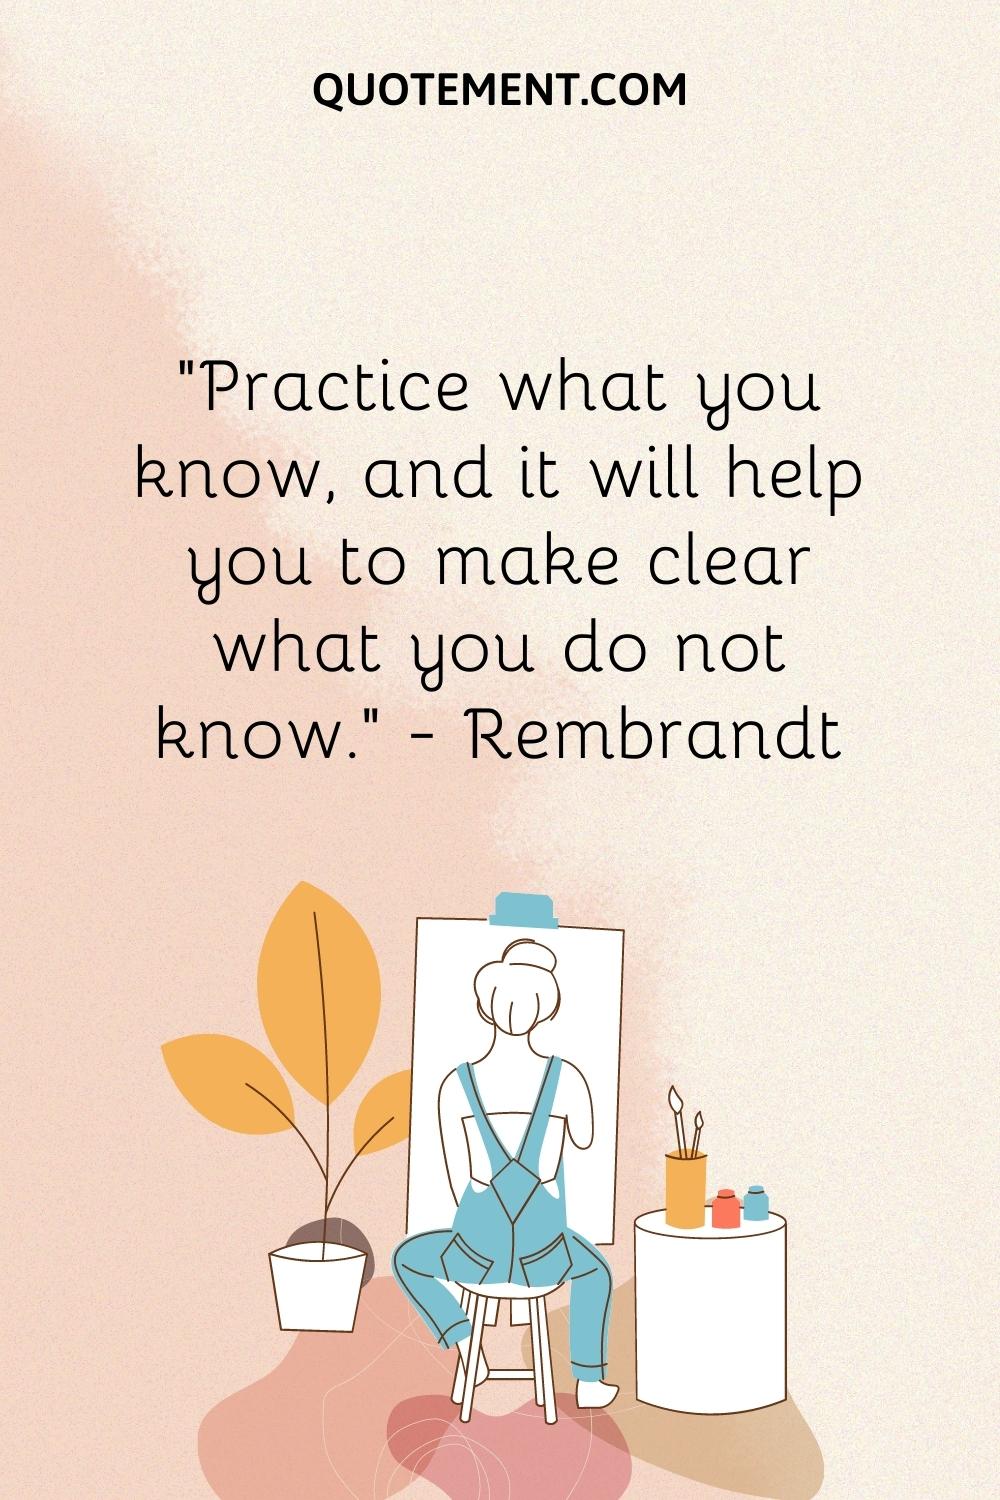 Practice what you know, and it will help you to make clear what you do not know